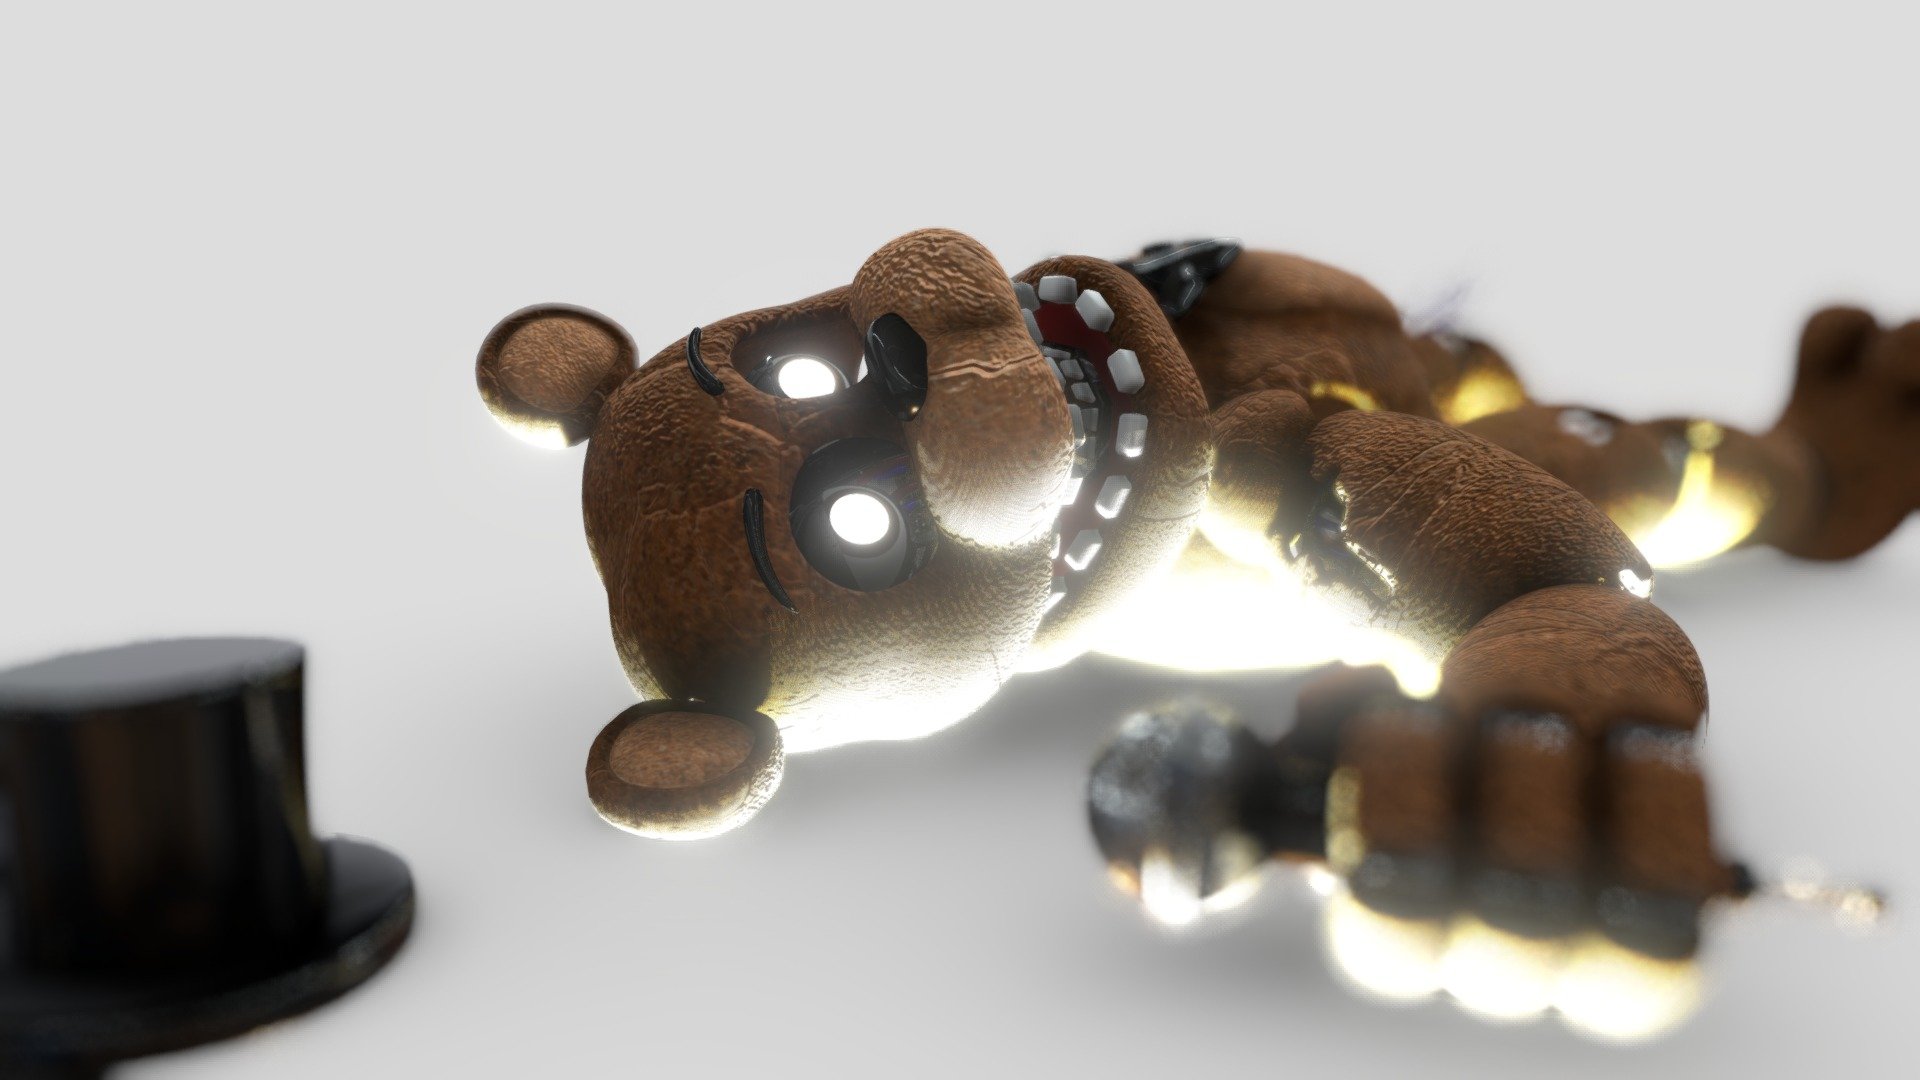 Withered Freddy Retexture - fivenightsatfreddys